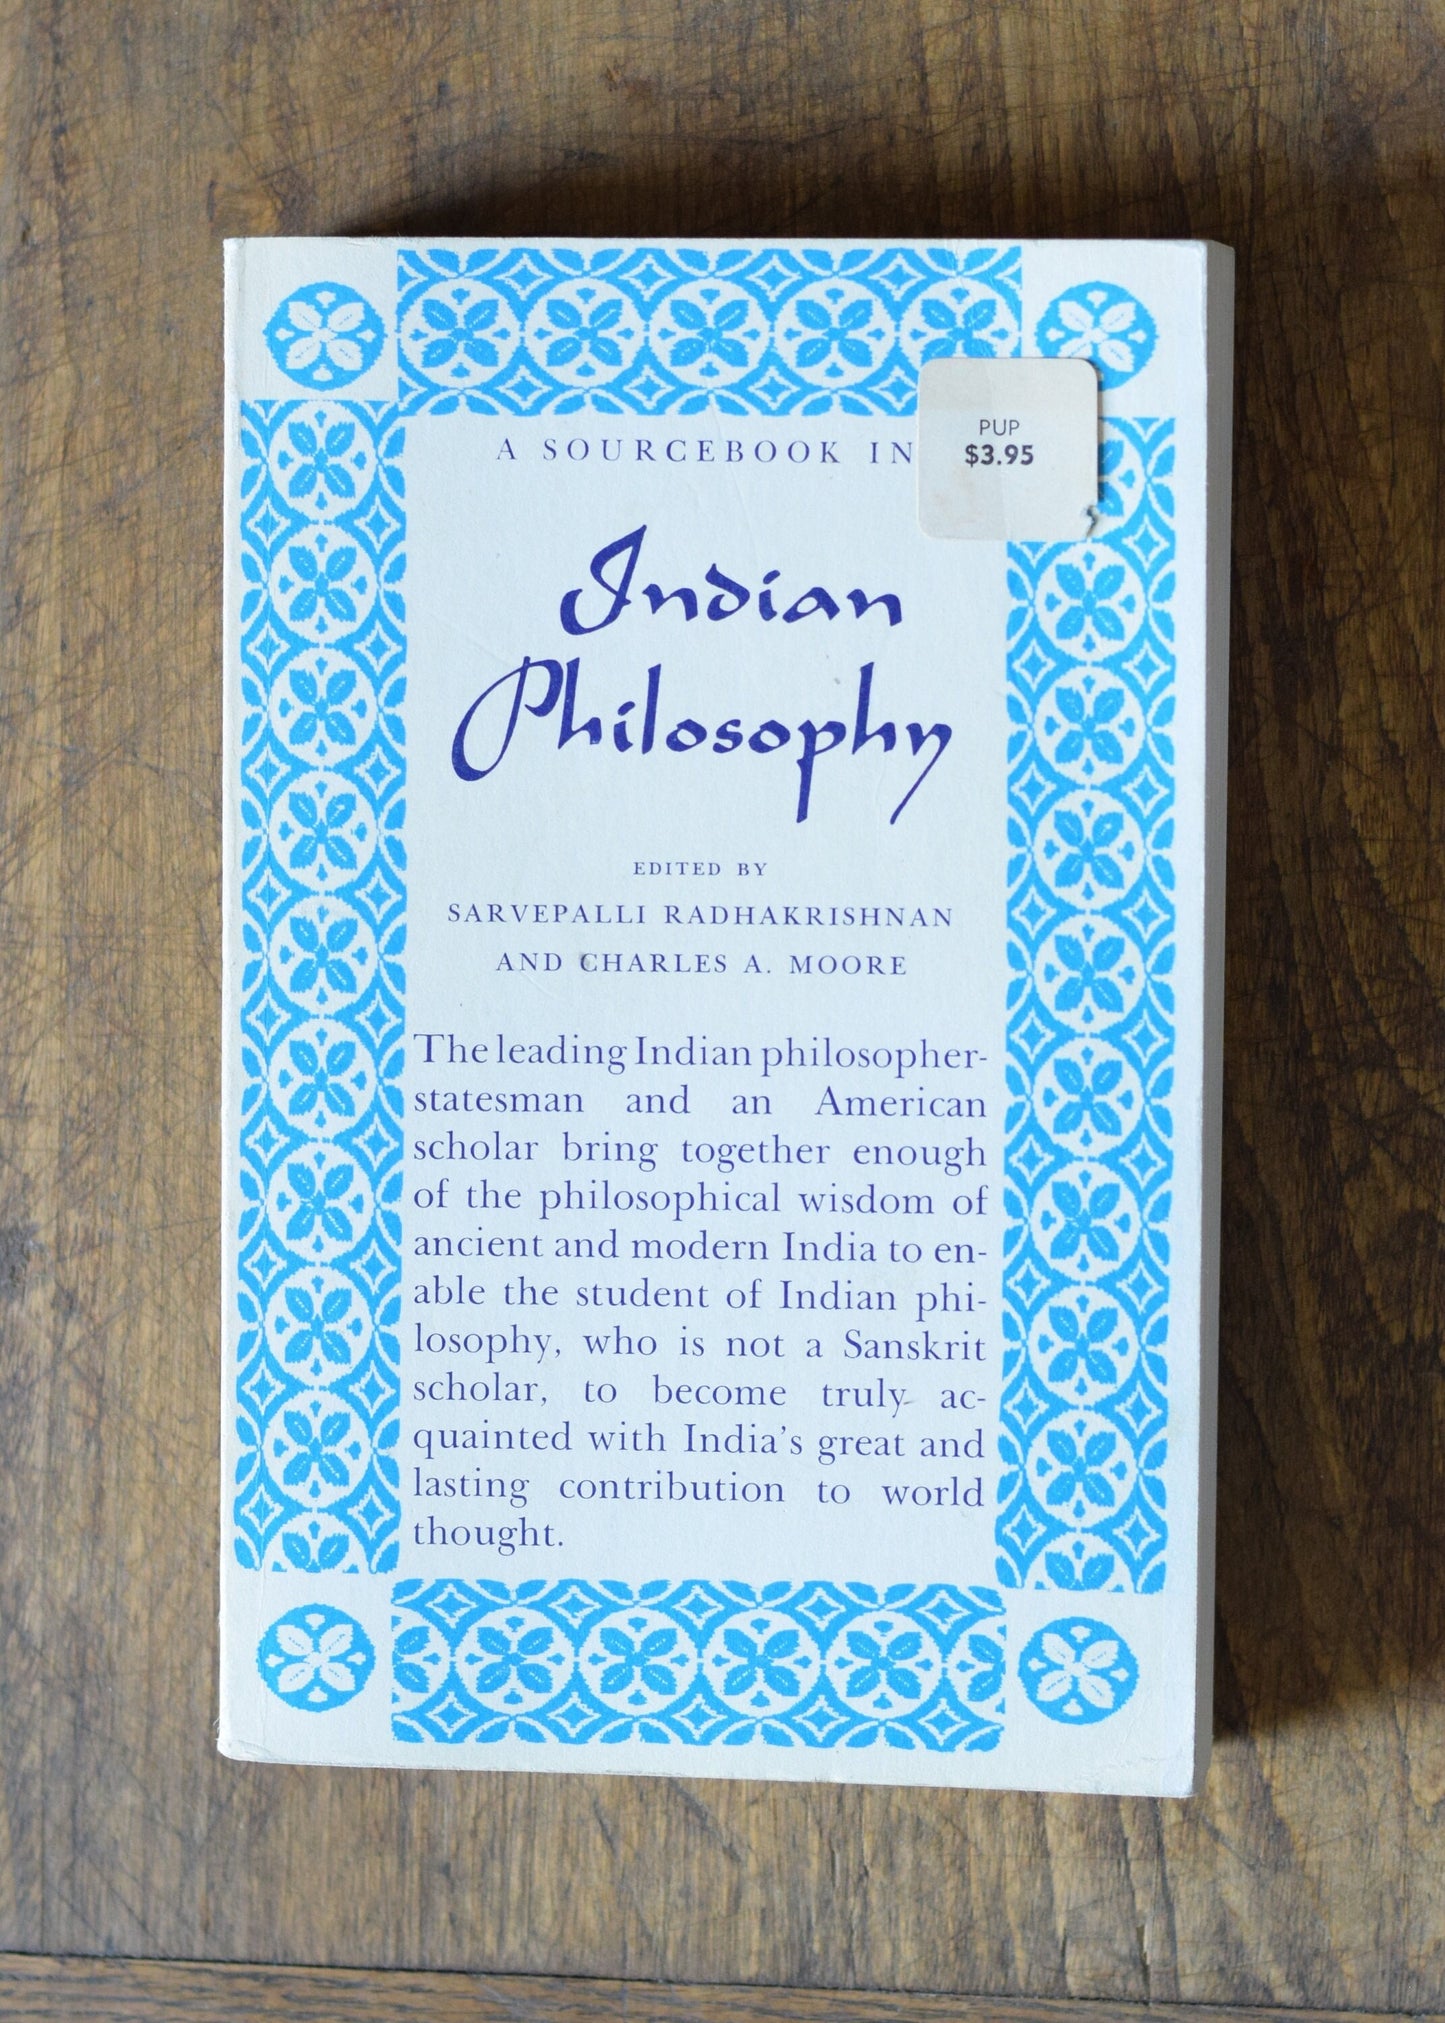 Vintage Non-Fiction Paperback: A Sourcebook in Indian Philosophy, Edited by Sarvepalli Radhakrishnan and Charles A Moore